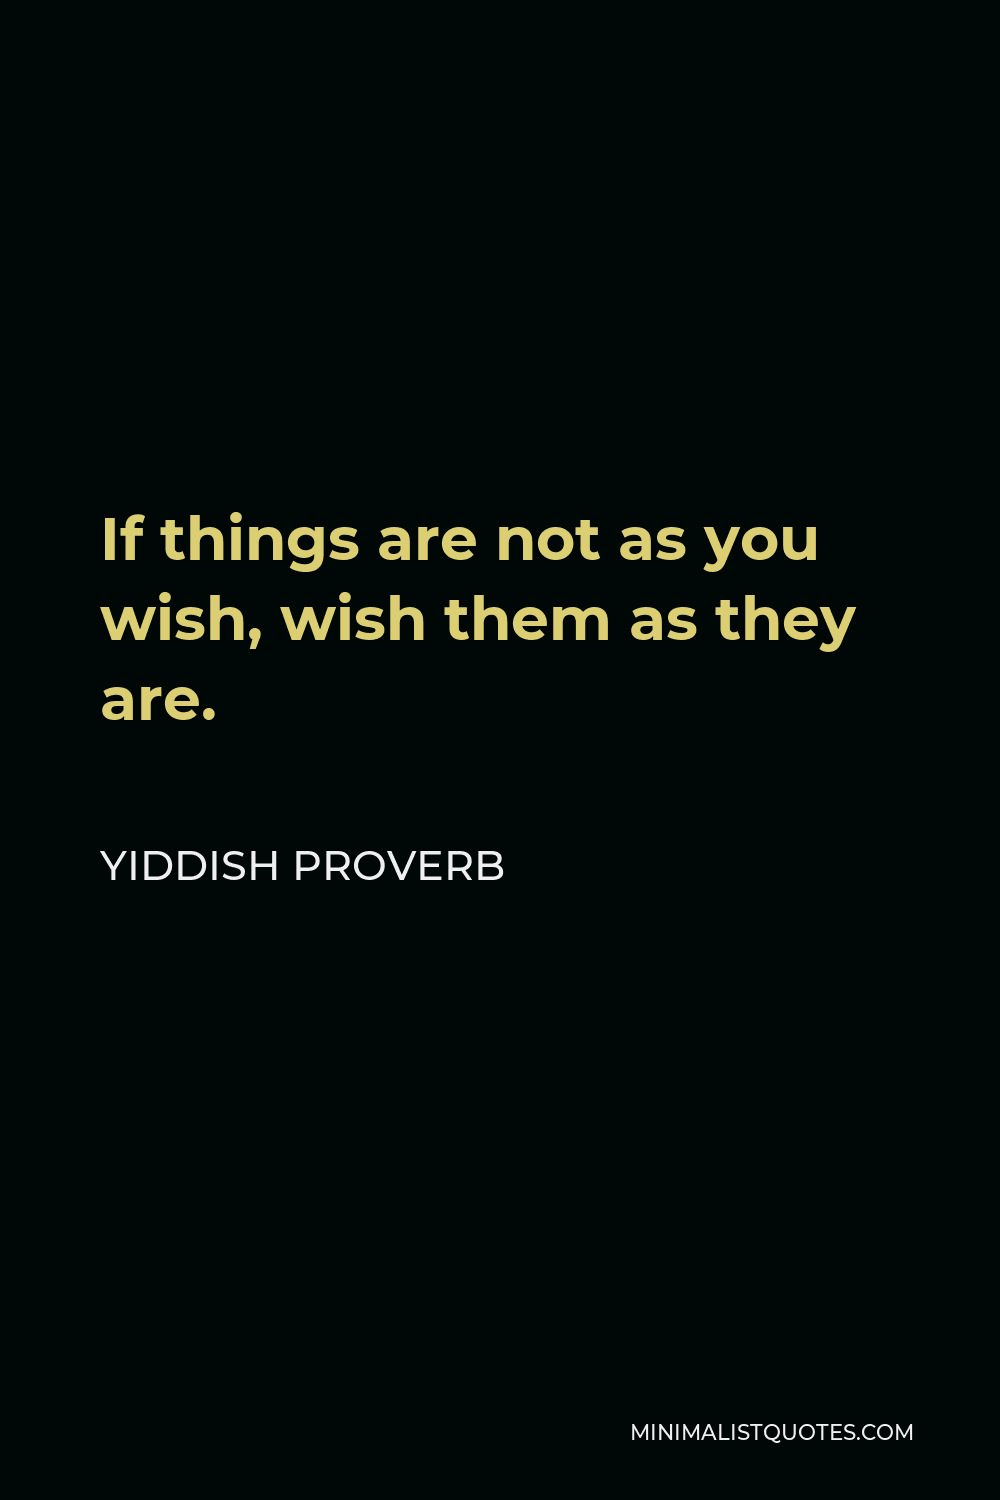 Yiddish Proverb Quote - If things are not as you wish, wish them as they are.